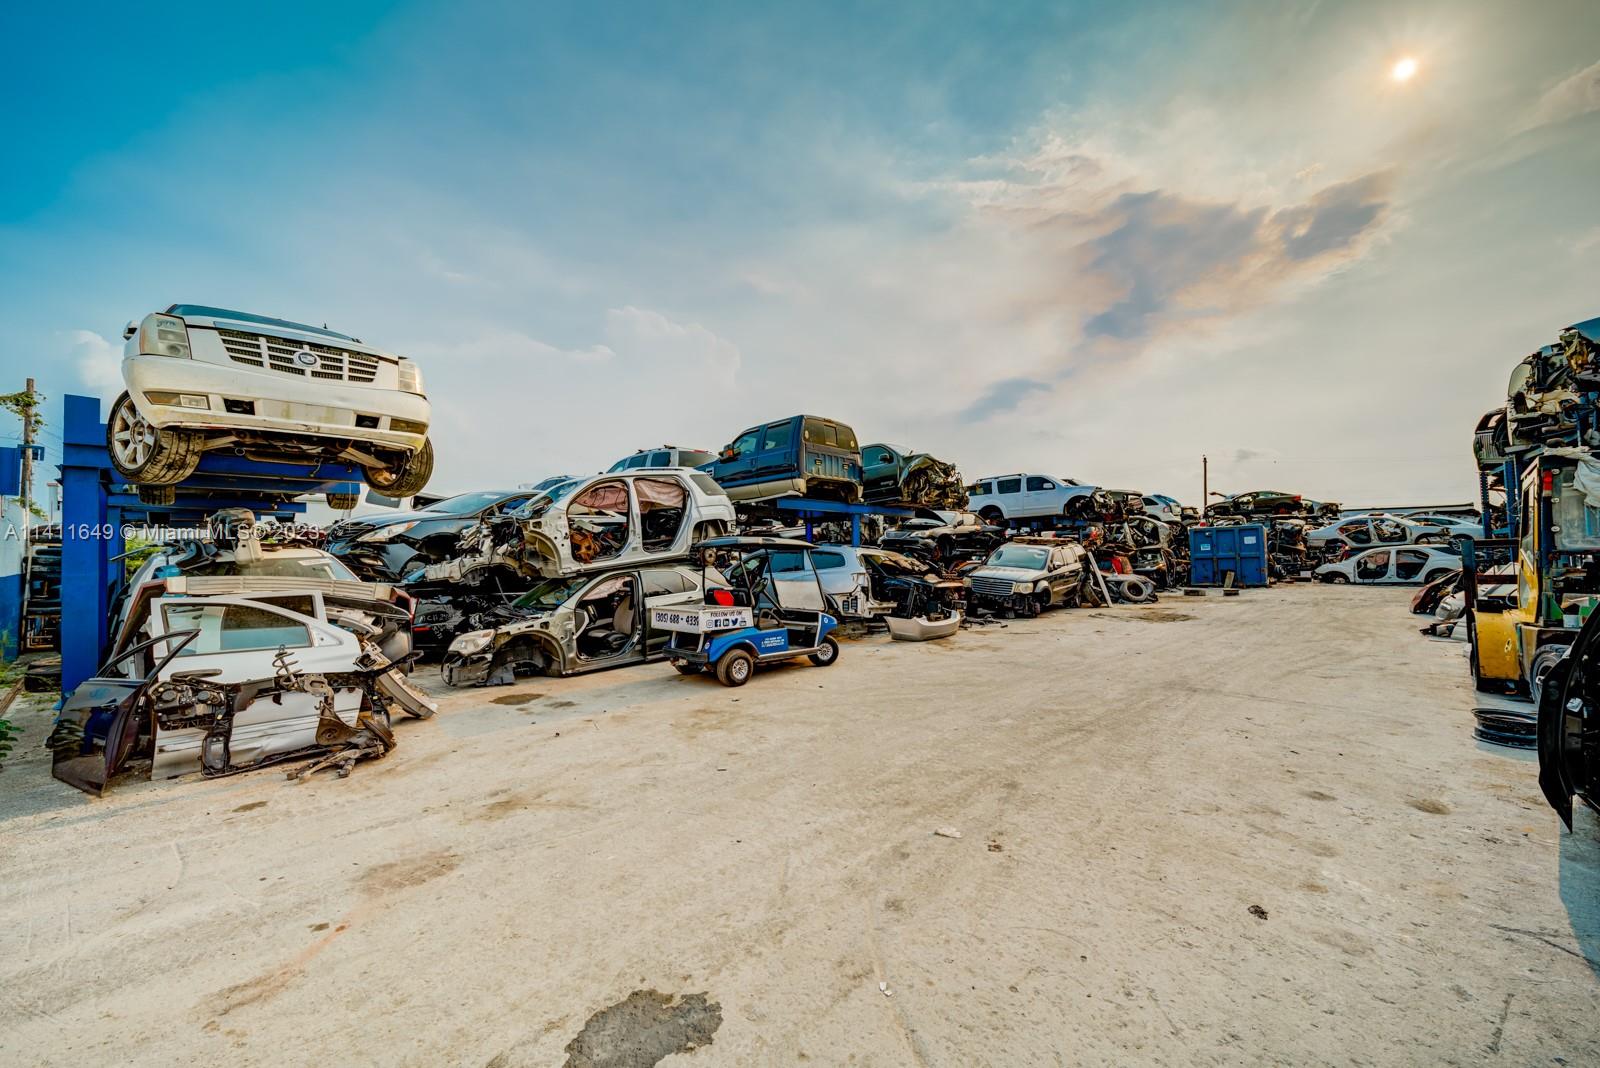 2 Junkyards For Sale in South Florida with the Real Estate Included, Miami, FL 33013